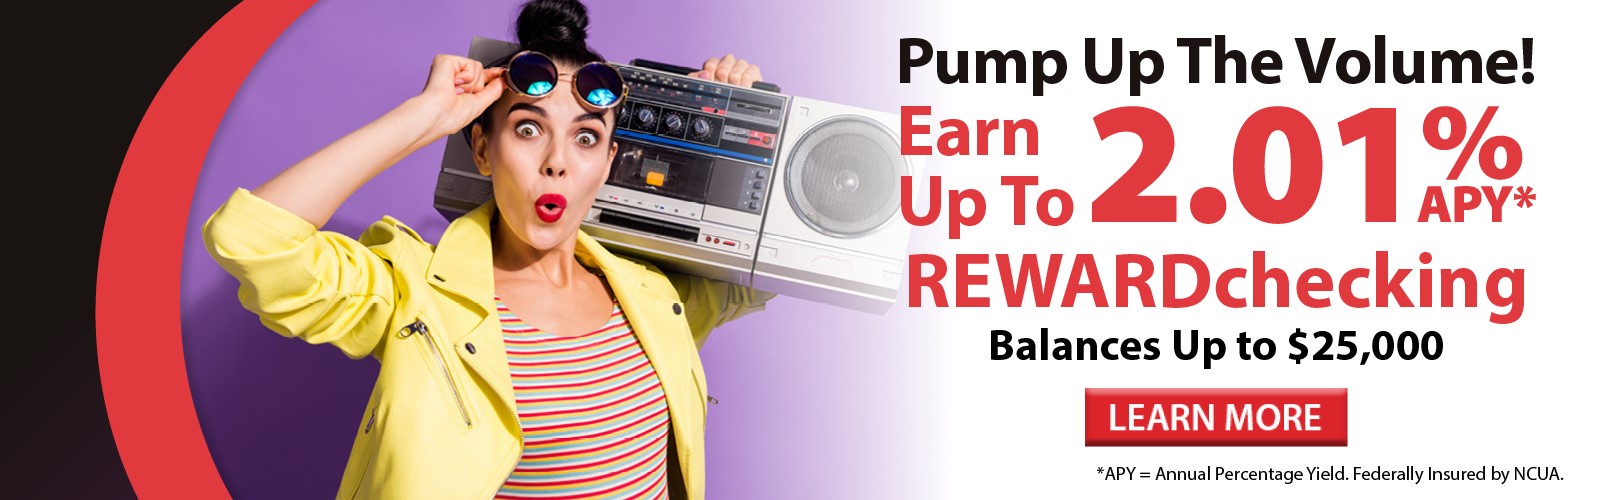 Pump up the volume! Earn up to 2.01% APY* on REWARDchecking balances up to $25,000. Click here for more information!